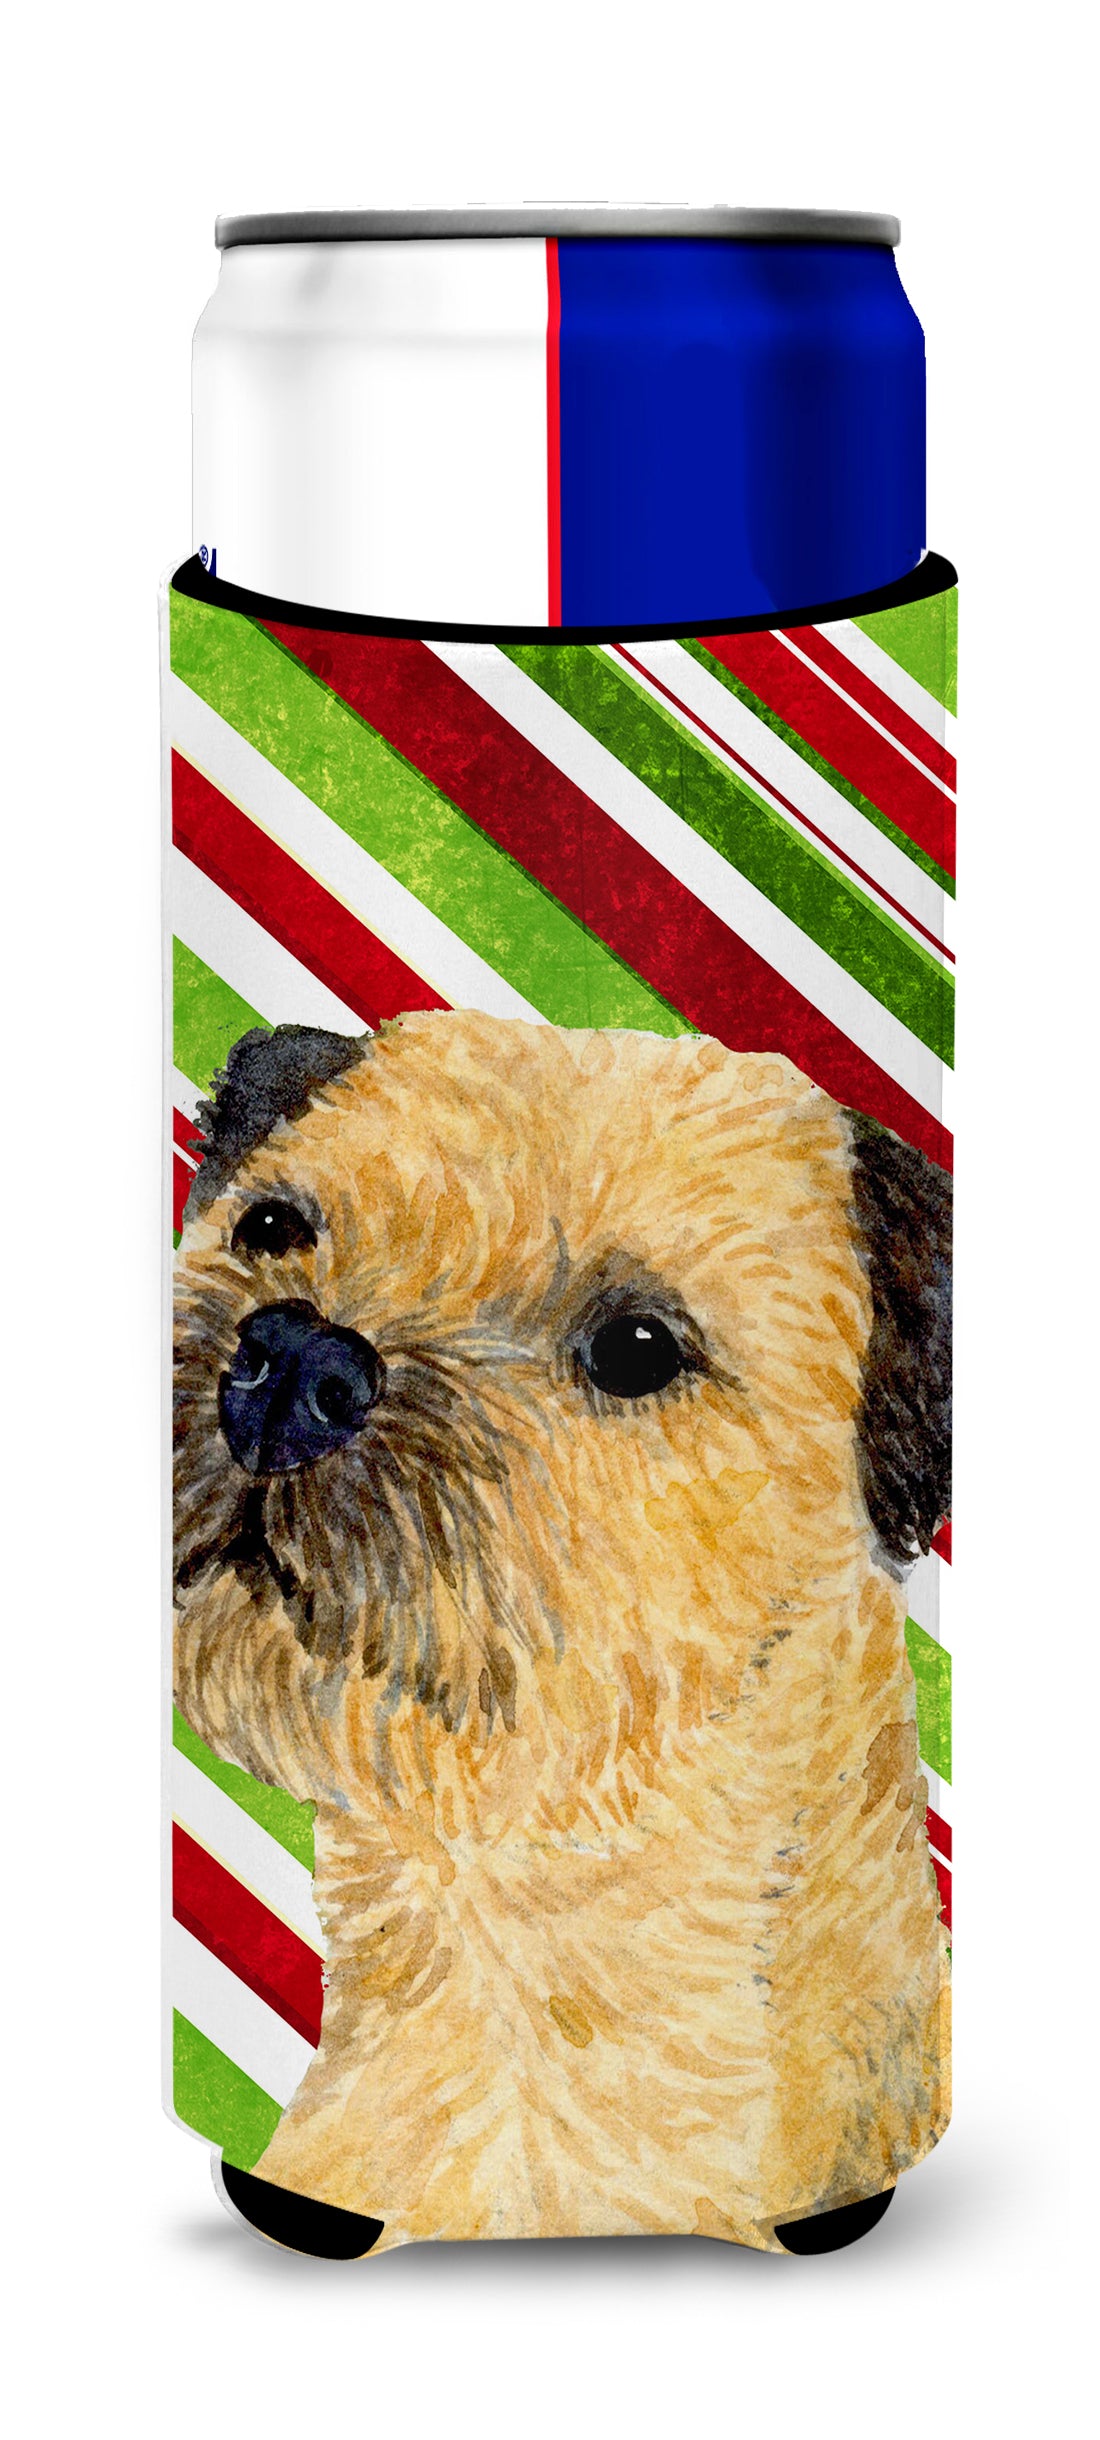 Border Terrier Candy Cane Holiday Christmas Ultra Beverage Insulators for slim cans LH9233MUK.